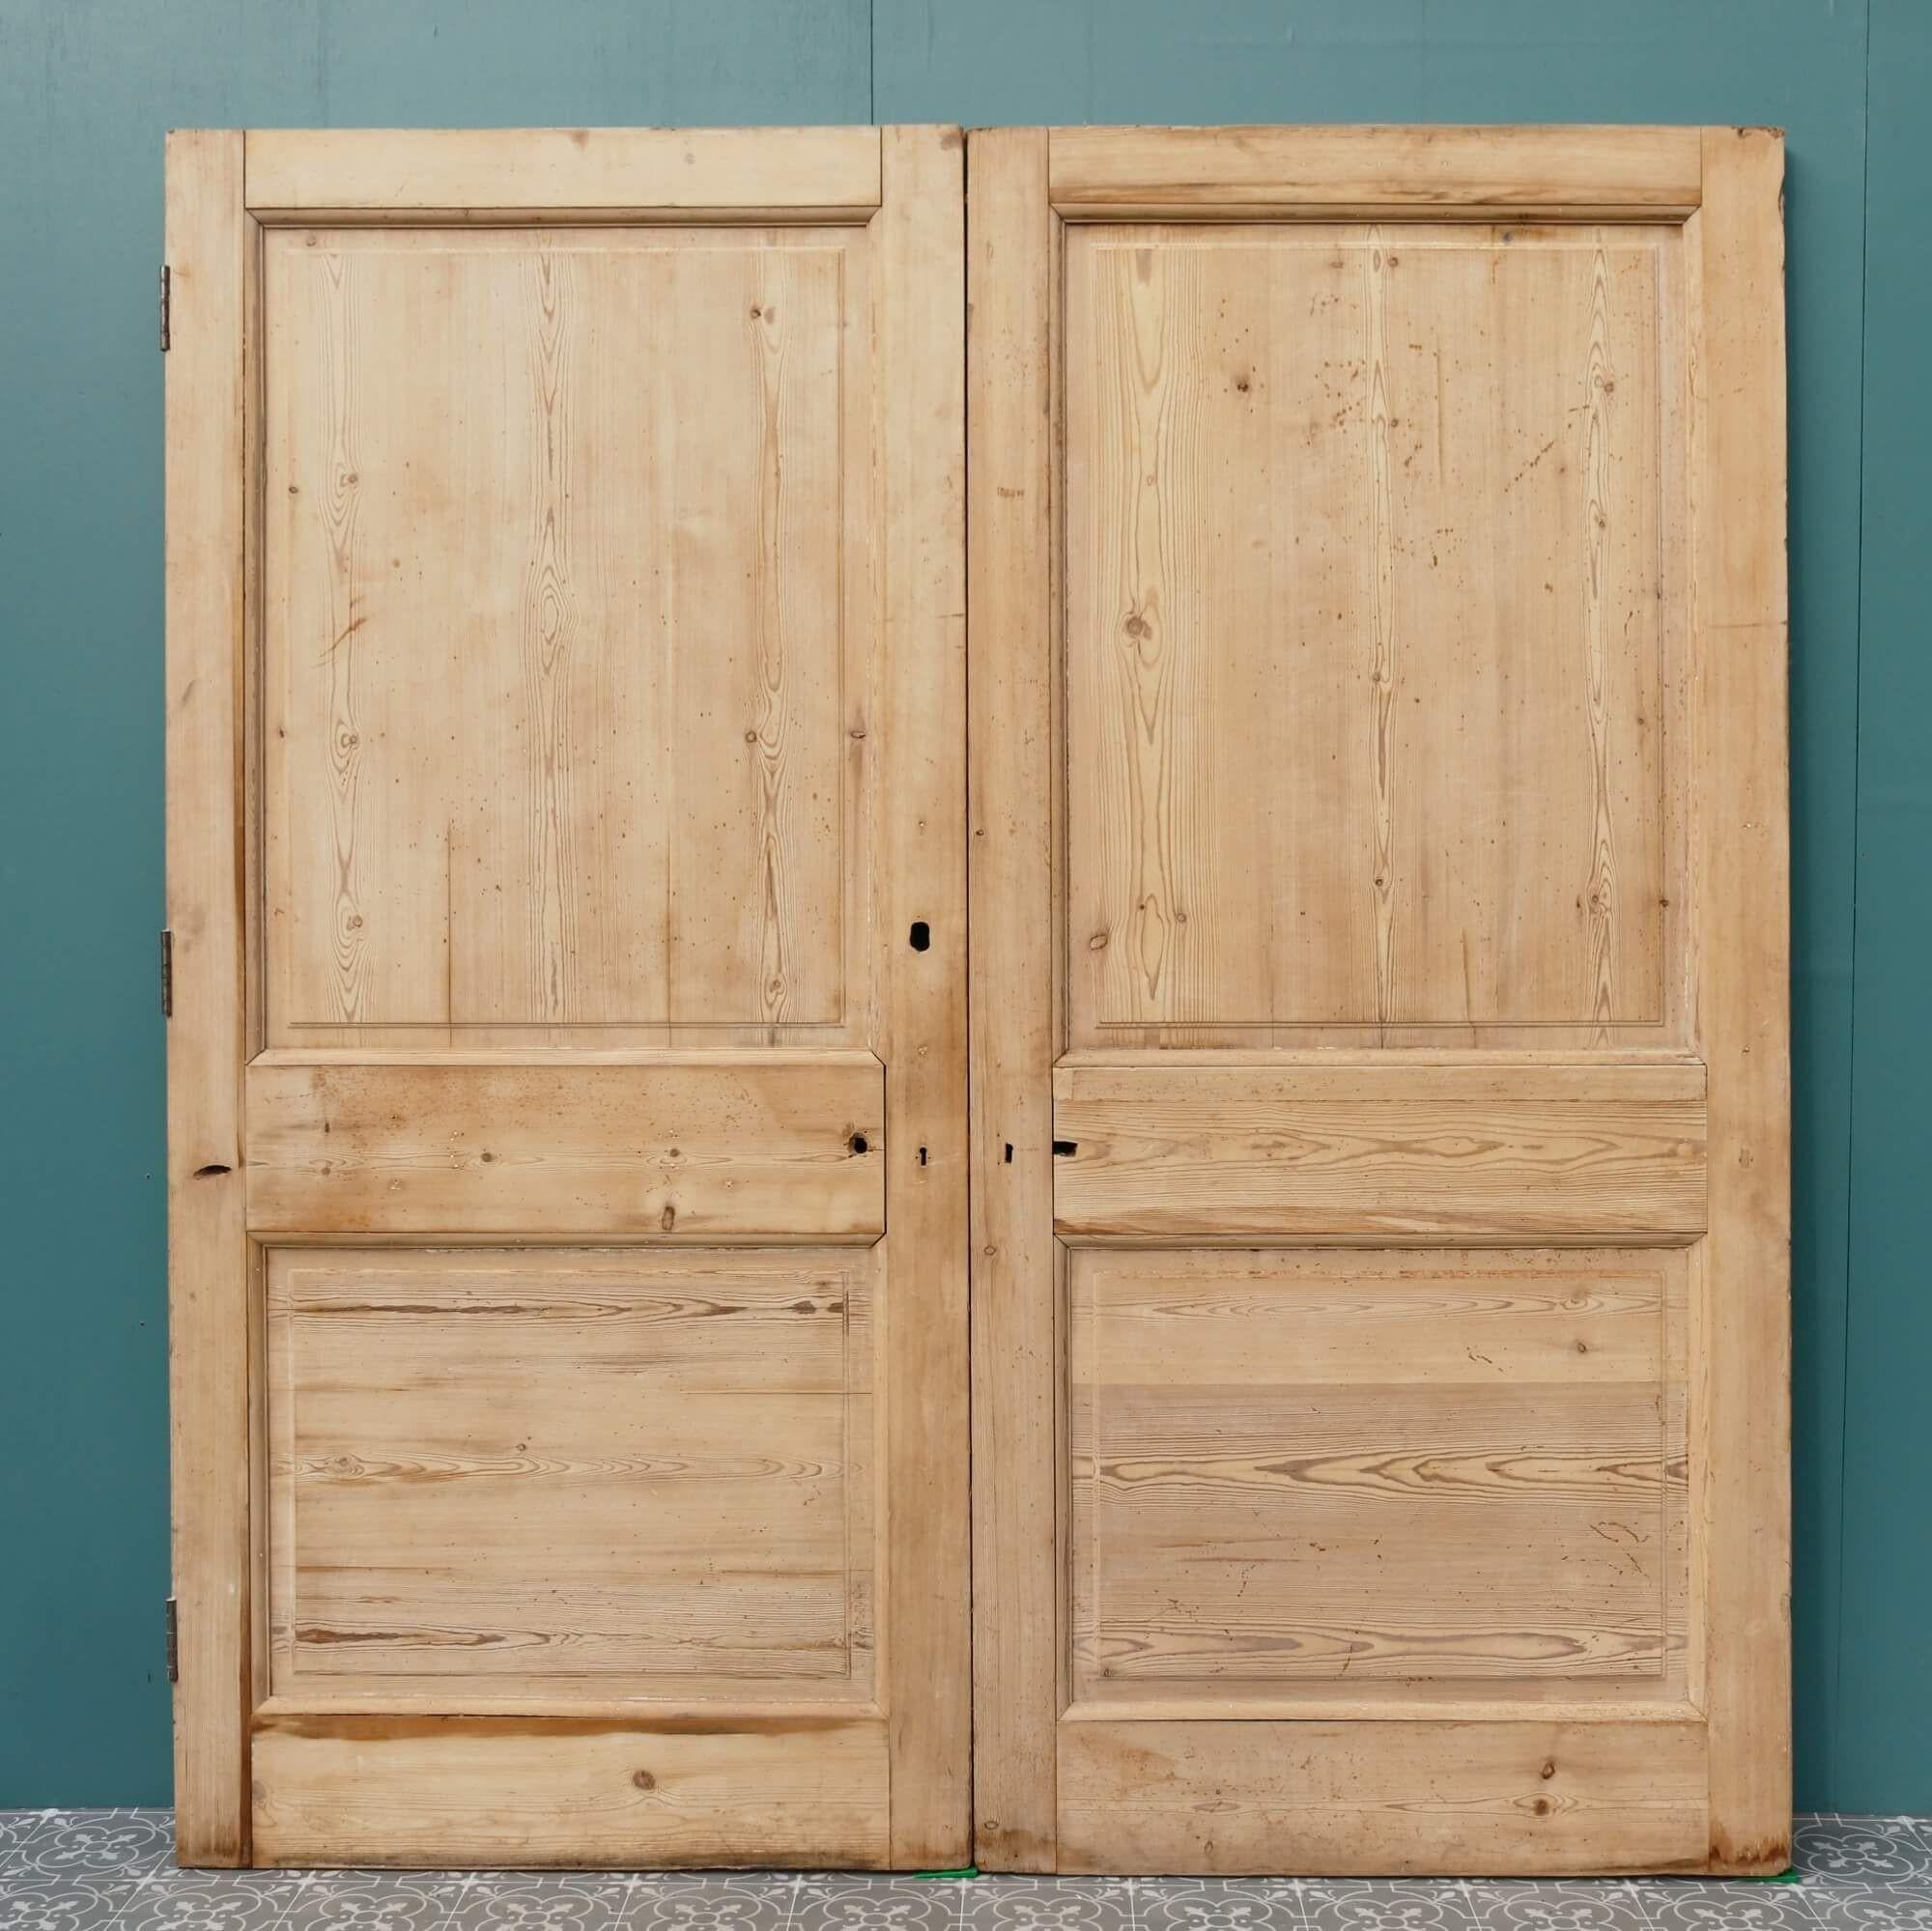 A pair of antique Victorian pine internal double doors dating from the early 20th century. These reclaimed double doors make a handsome set of dividing doors in a period townhouse or traditional cottage. Detailed with smart raised and fielded panels